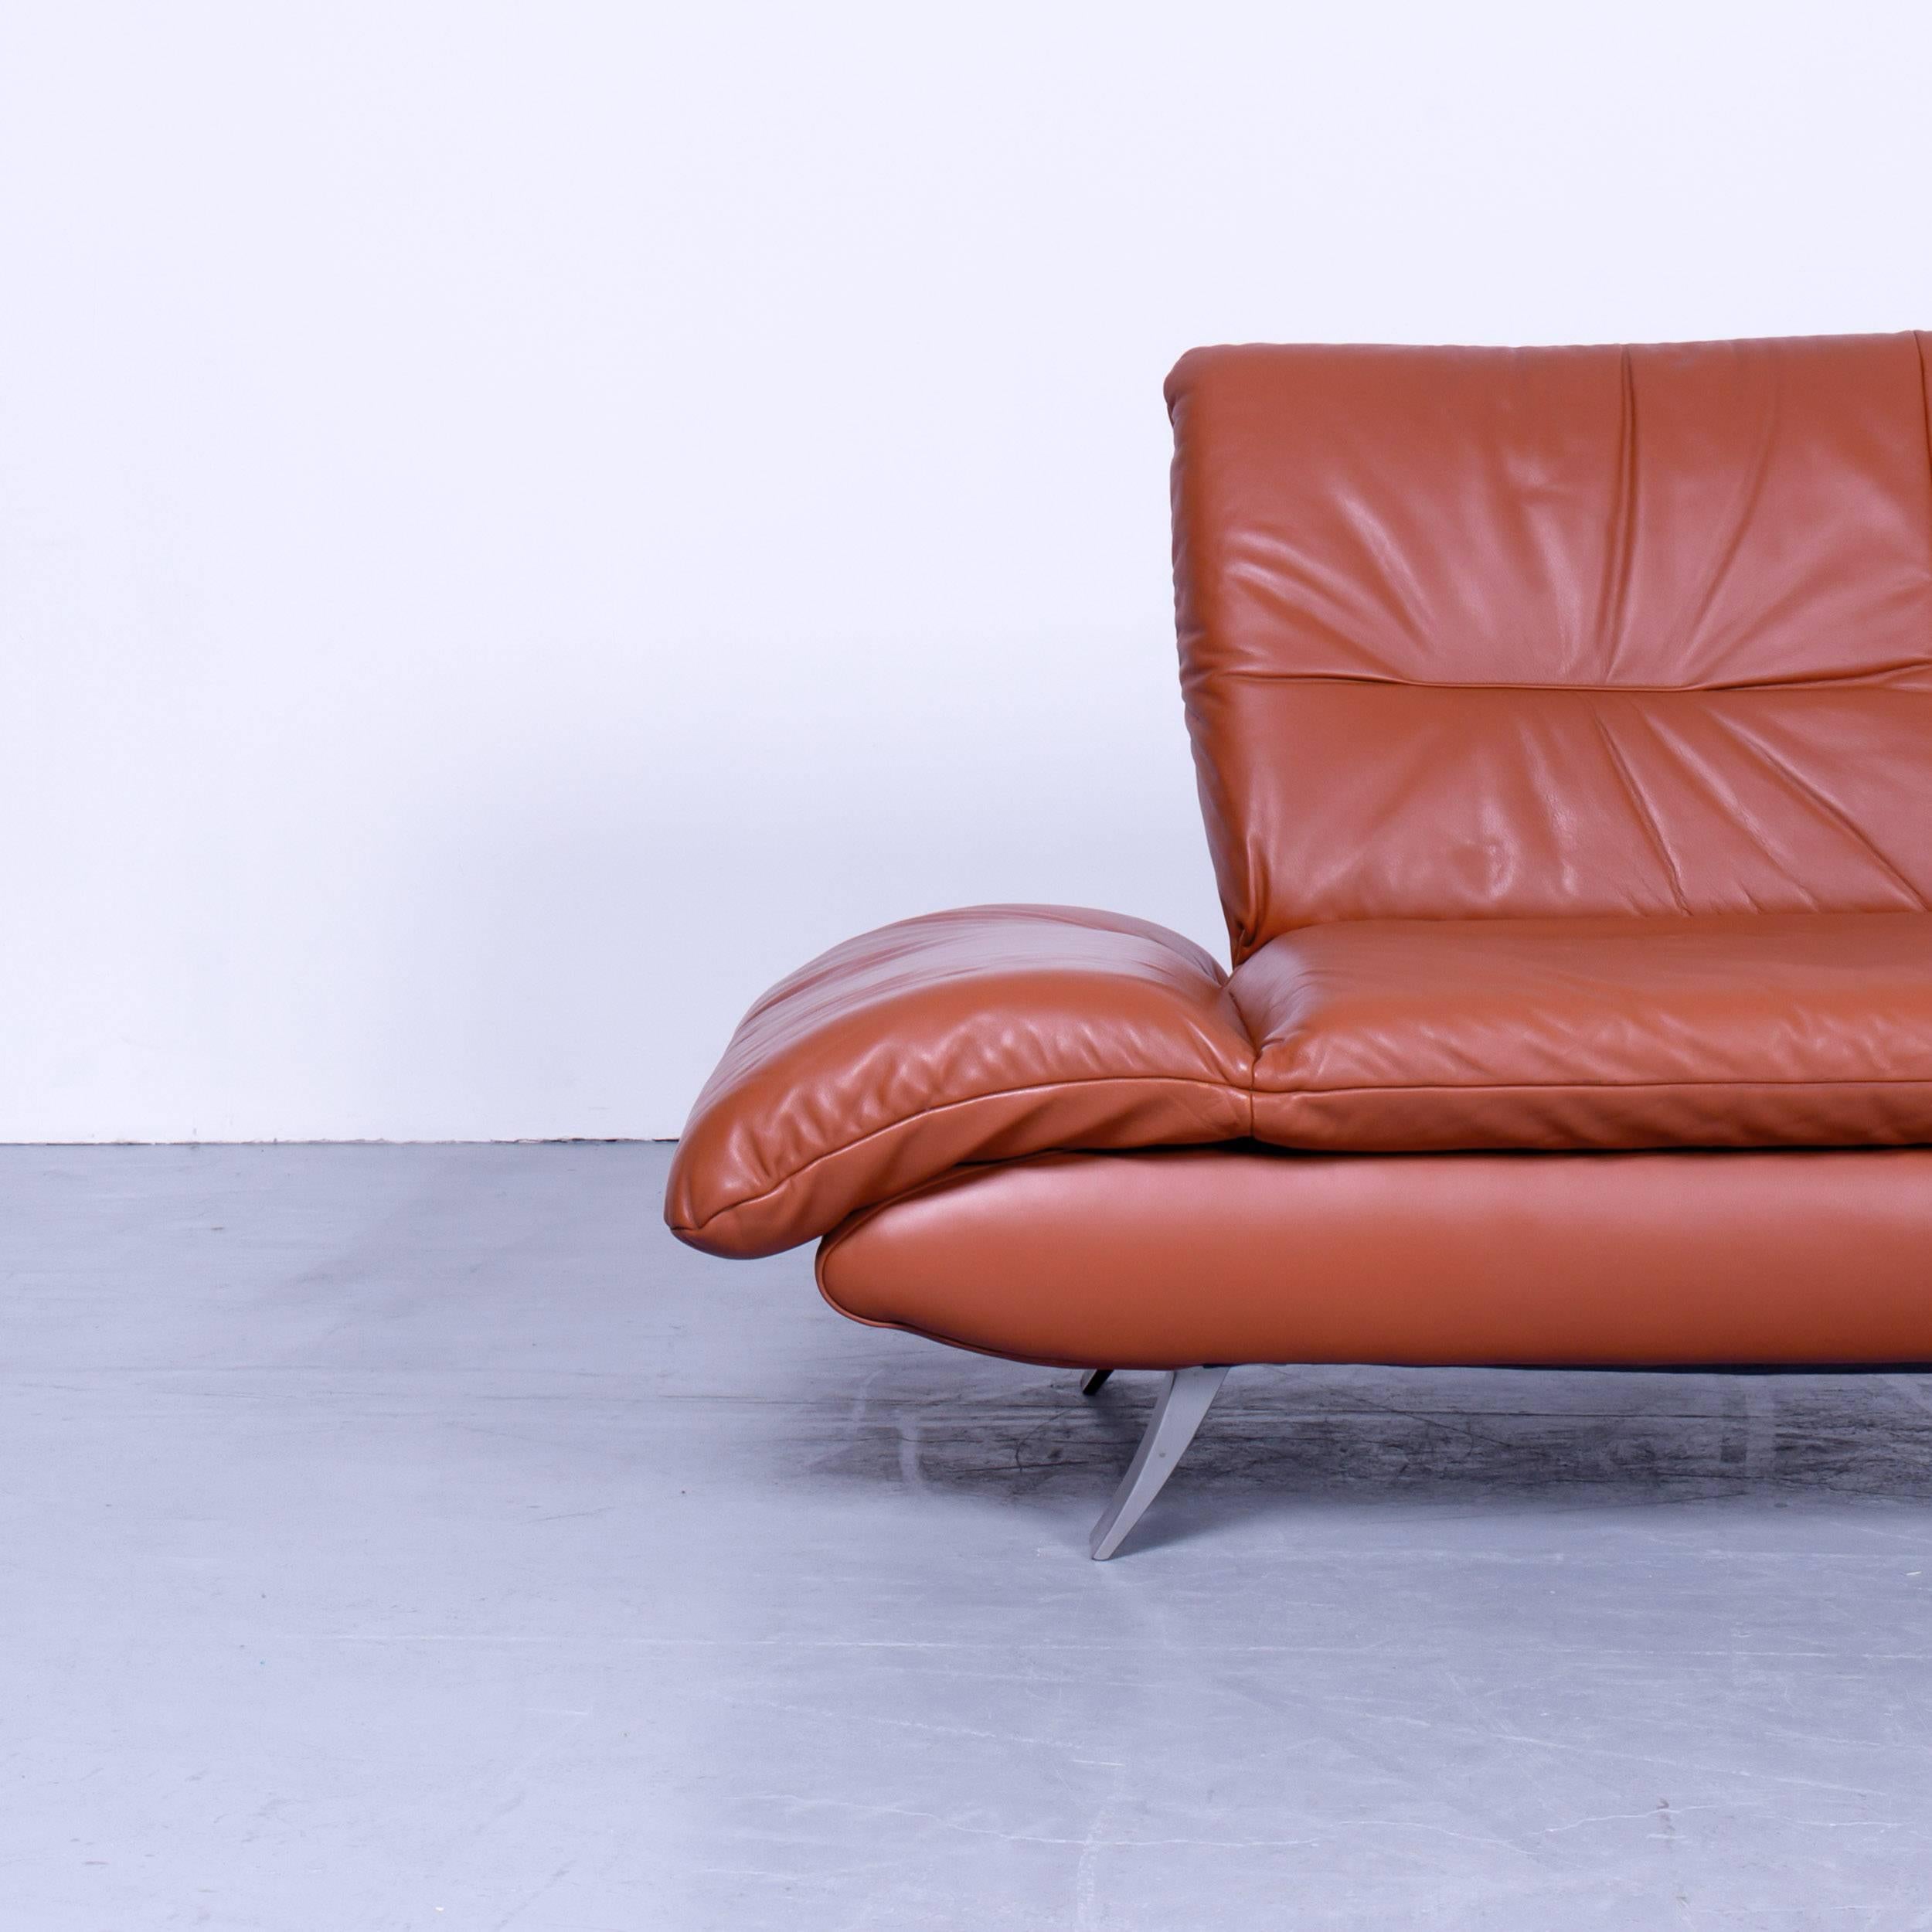 Koinor Rossini designer two-seat sofa orange red leather function modern two, in a minimalistic and modern design, with convenient functions, made for pure comfort and flexibility.